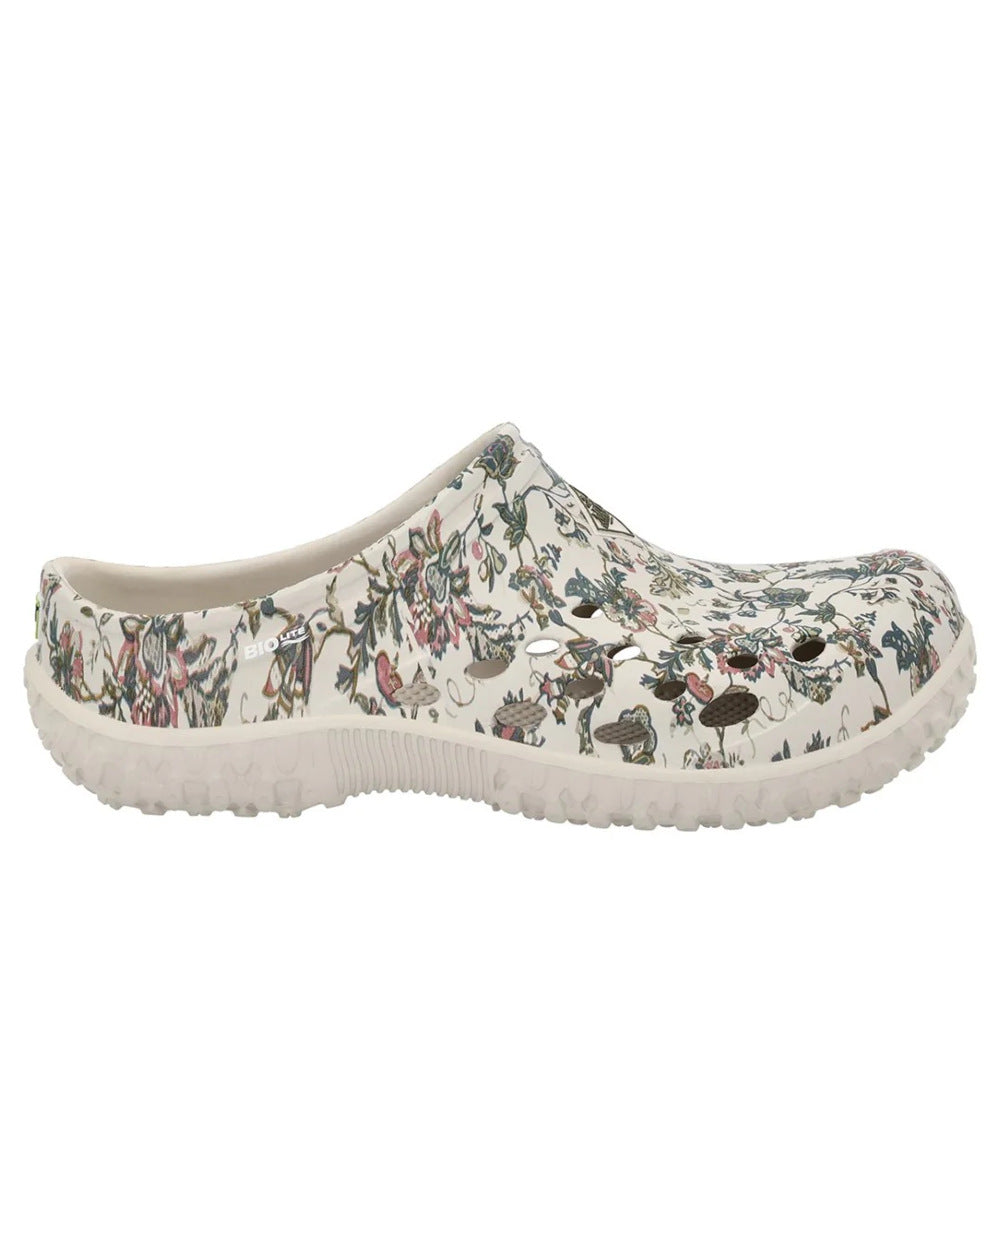 Light Grey Floral Print Coloured Muck Boots Womens Muckster Lite Clogs On A White Background 